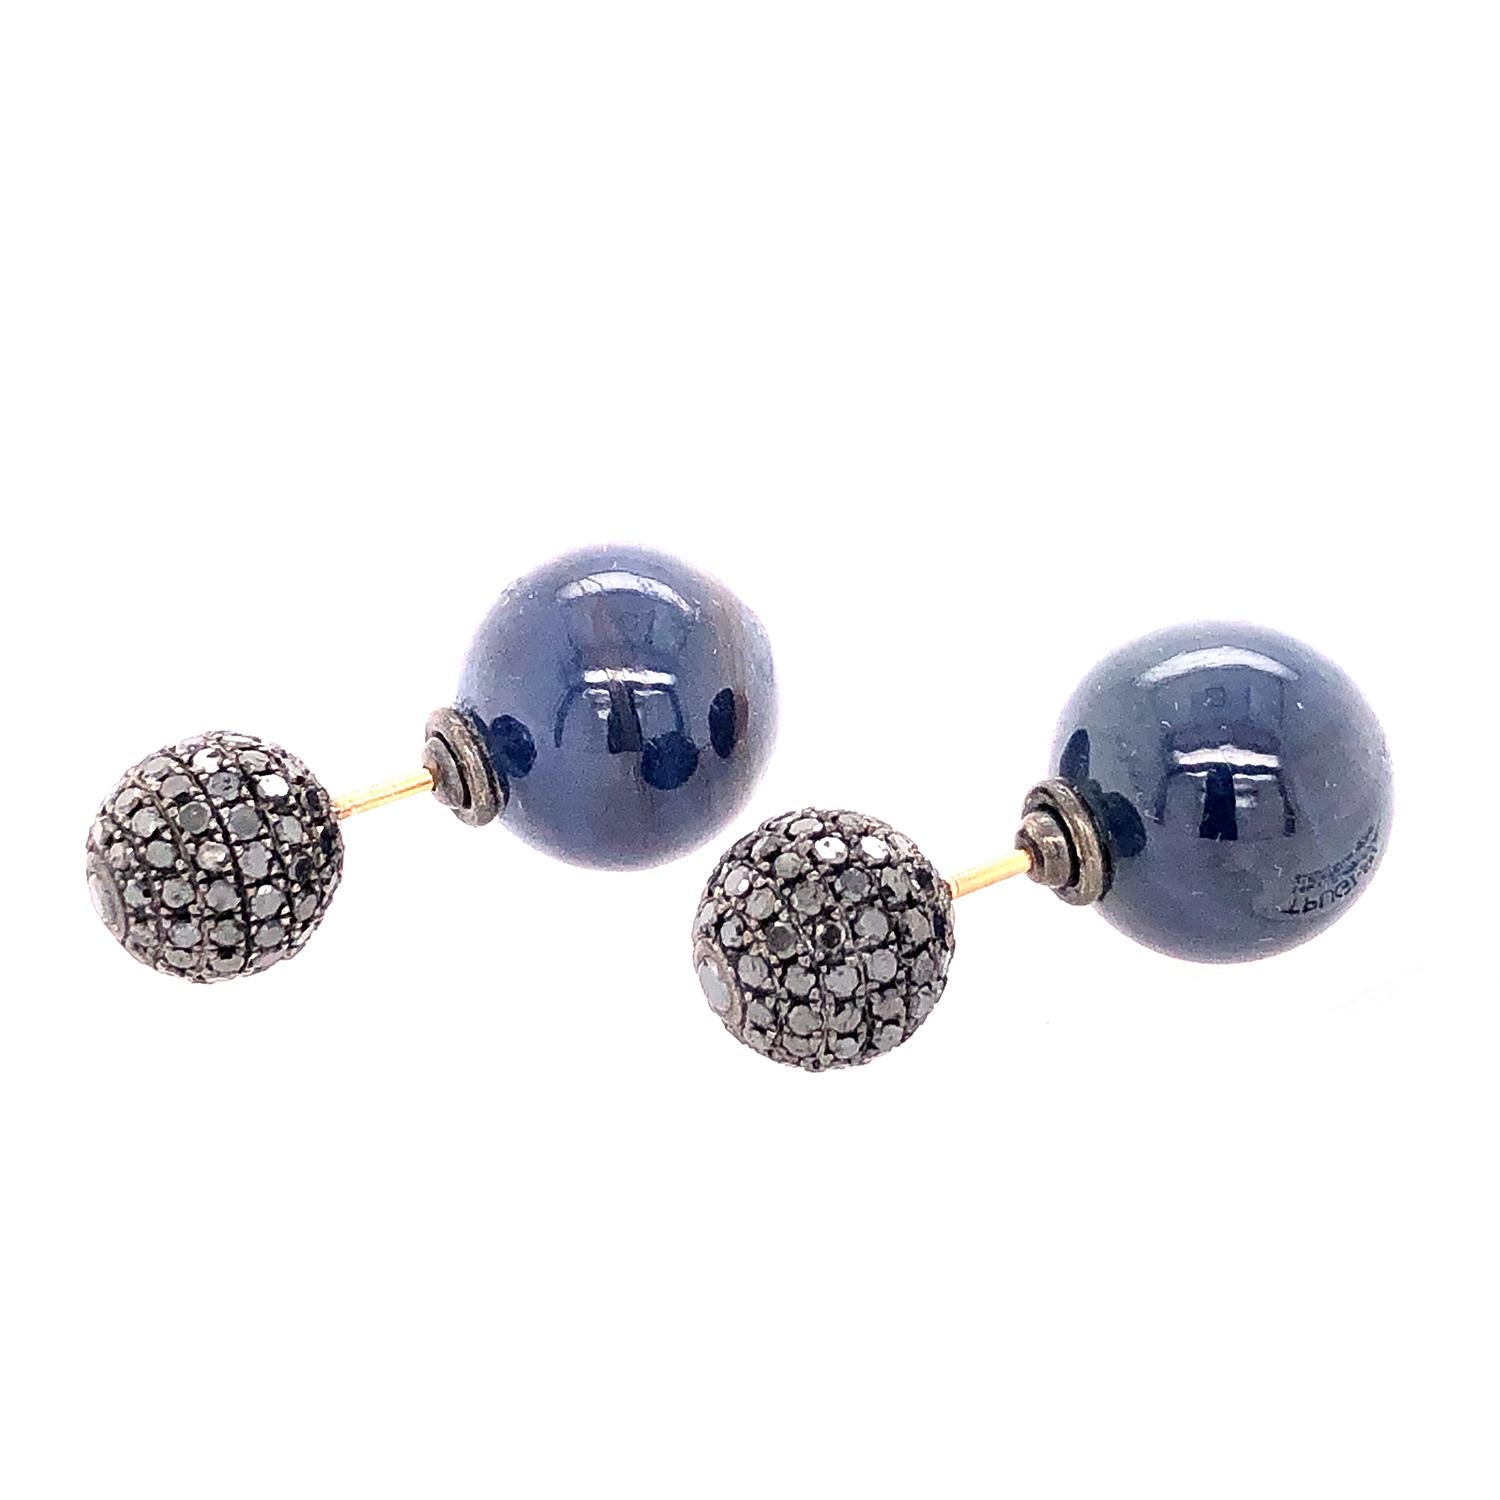 Artisan Sapphire & Pave Diamond Ball Tunnel Earrings Made in 14k Gold & Silver For Sale